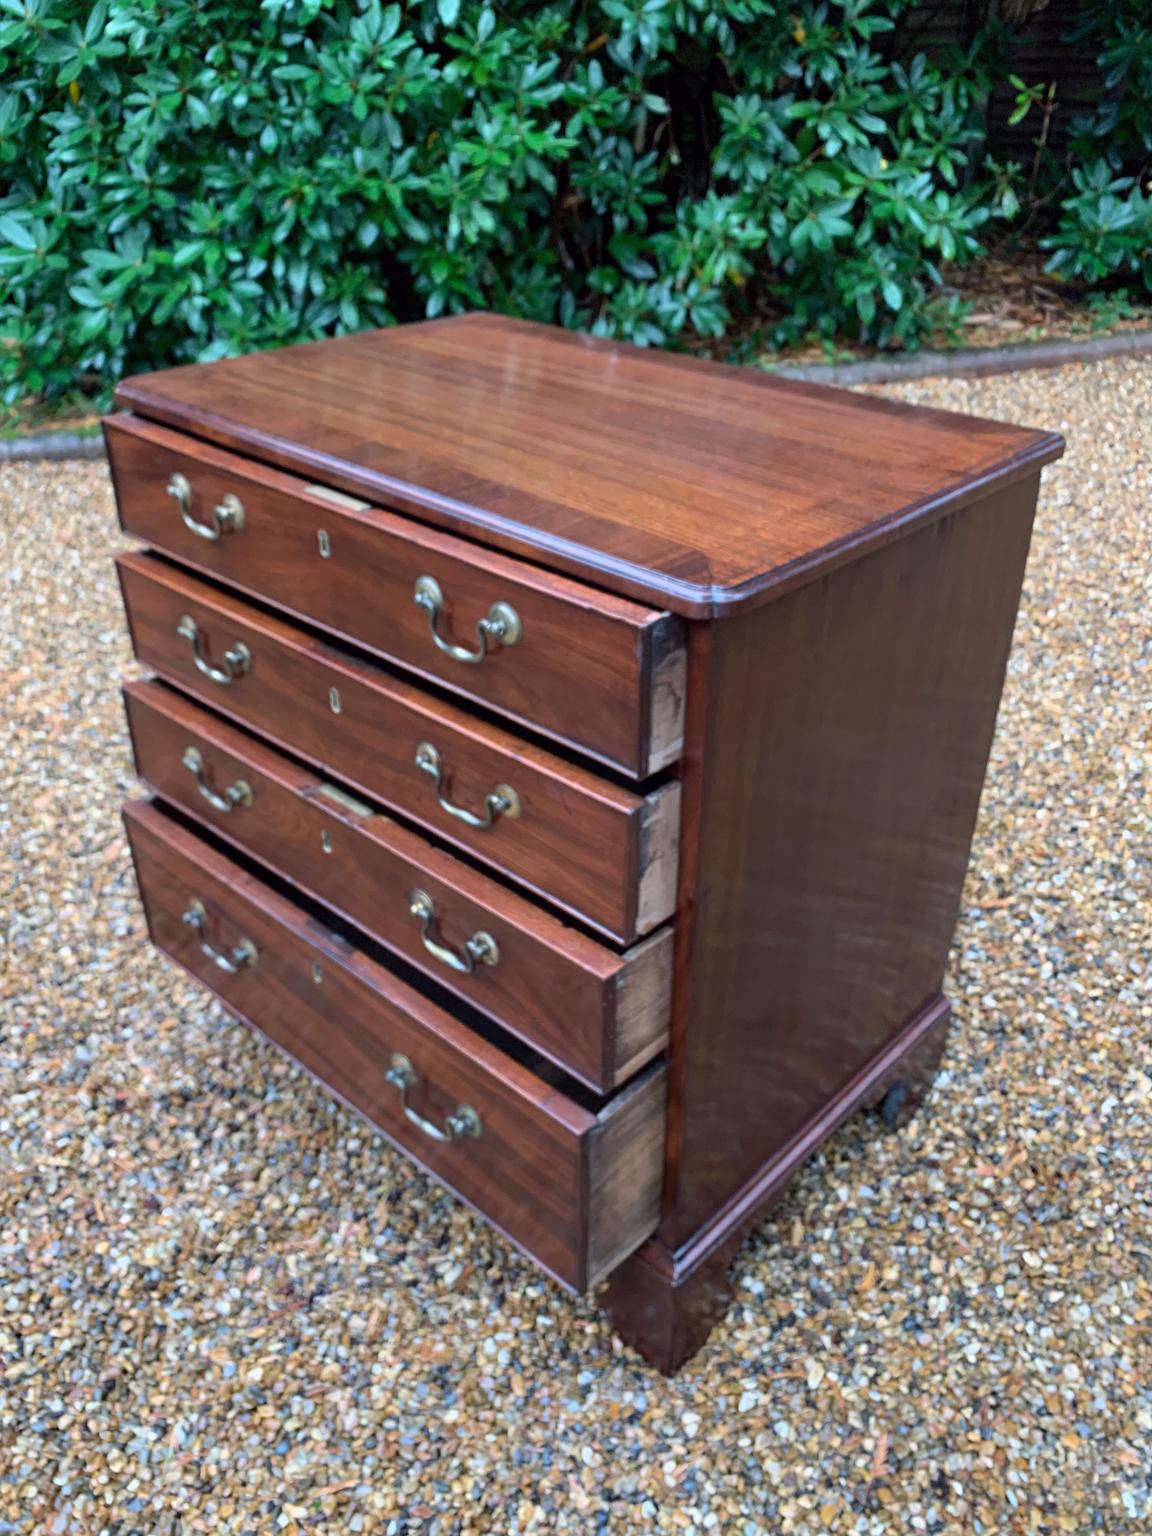 Georgian Mahogany Chest of Drawers with Brass Swan Neck Handles In Good Condition For Sale In Richmond, London, Surrey